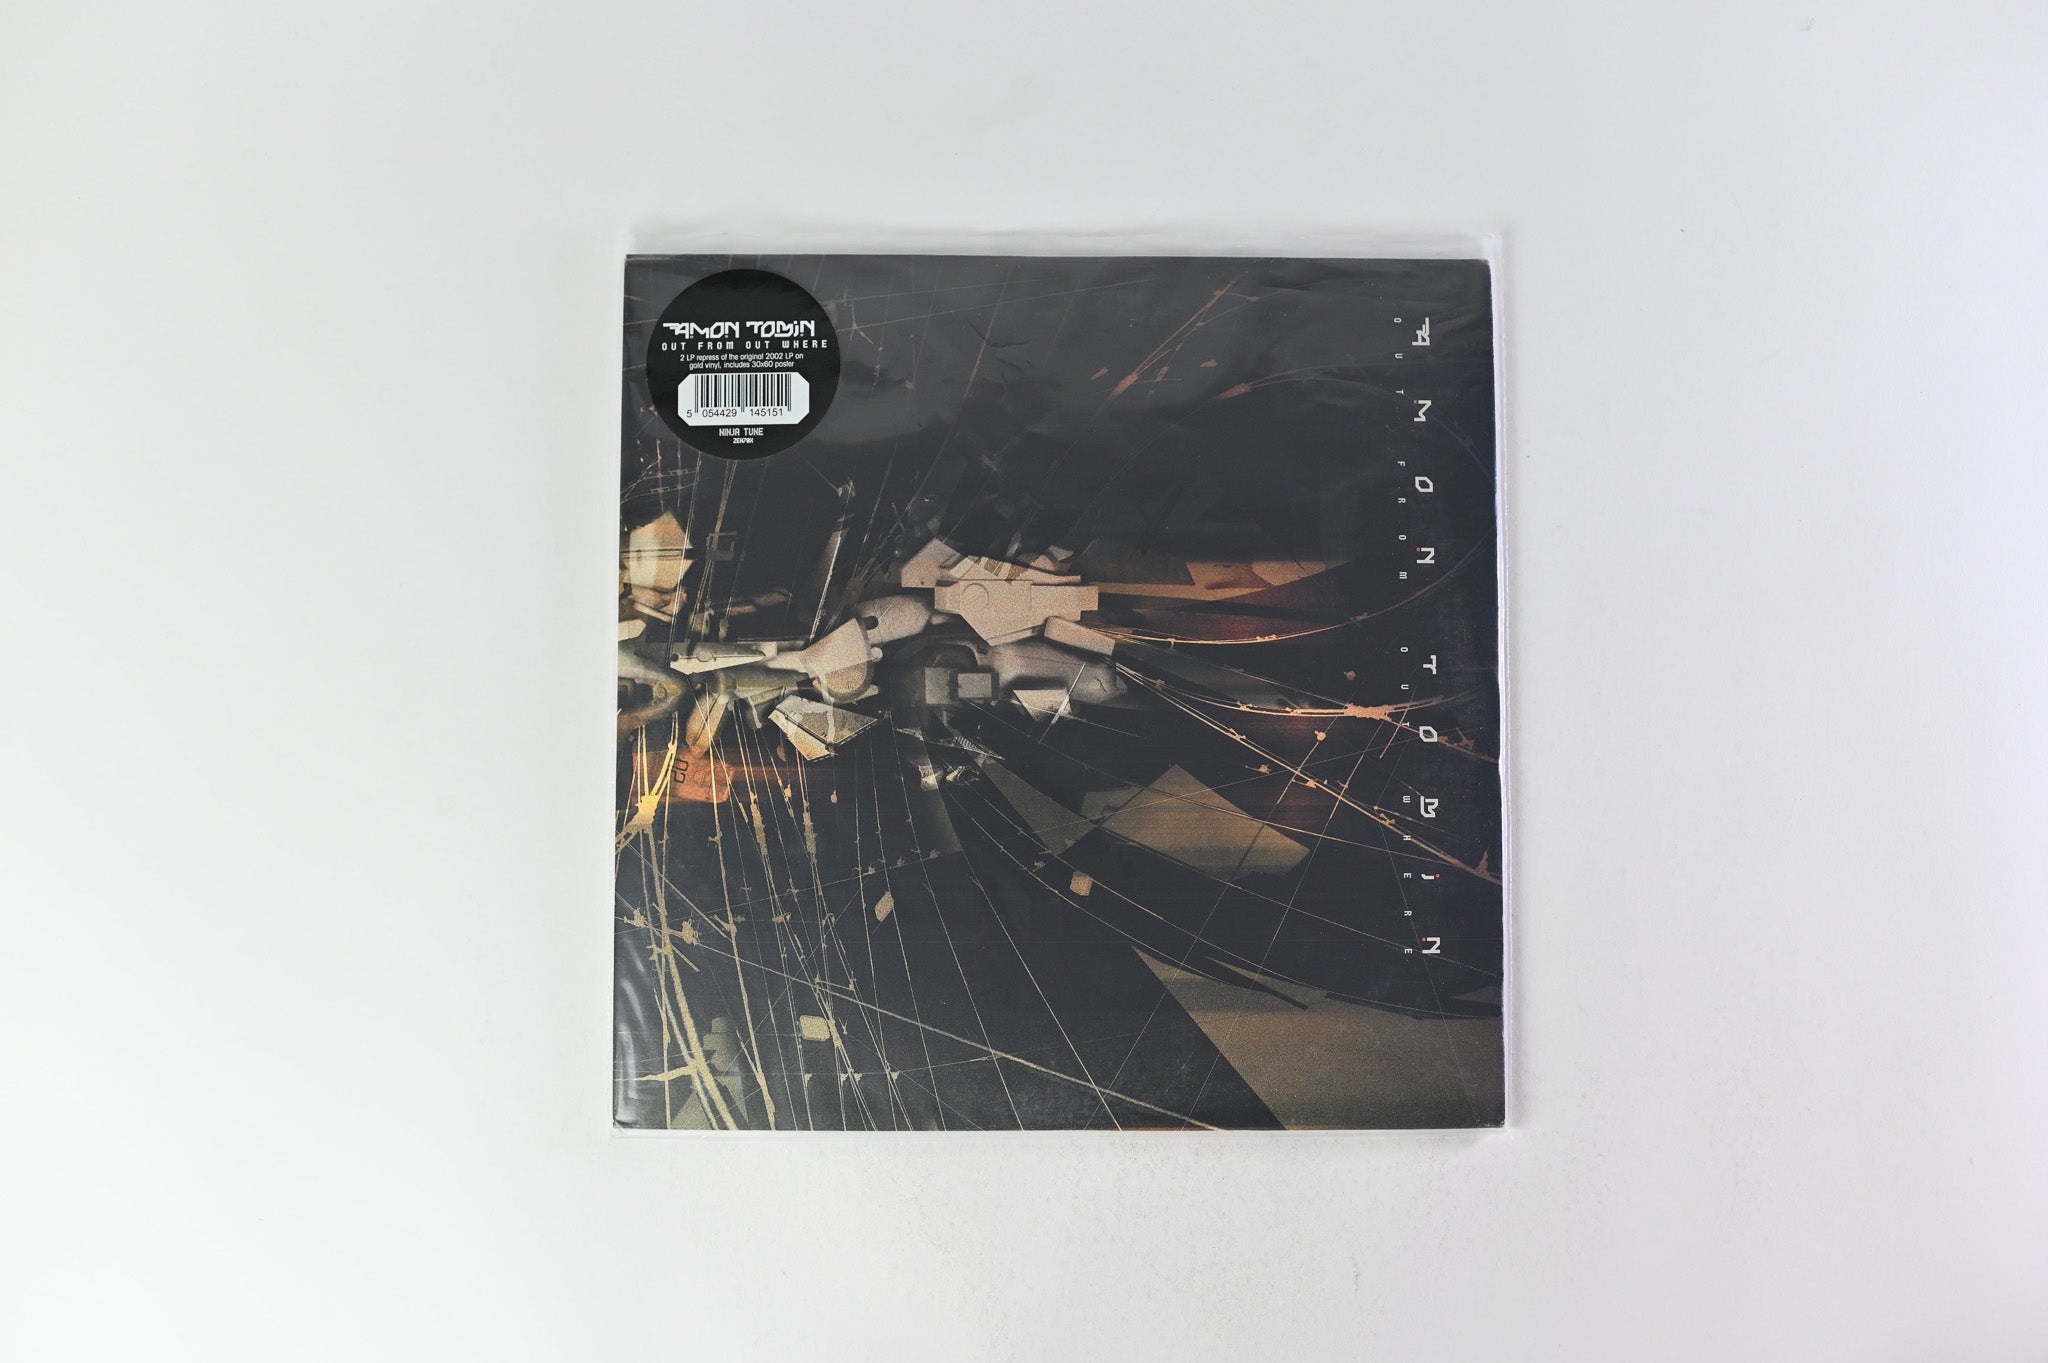 Amon Tobin - Out From Out Where on Ninja Tune - Gold Vinyl